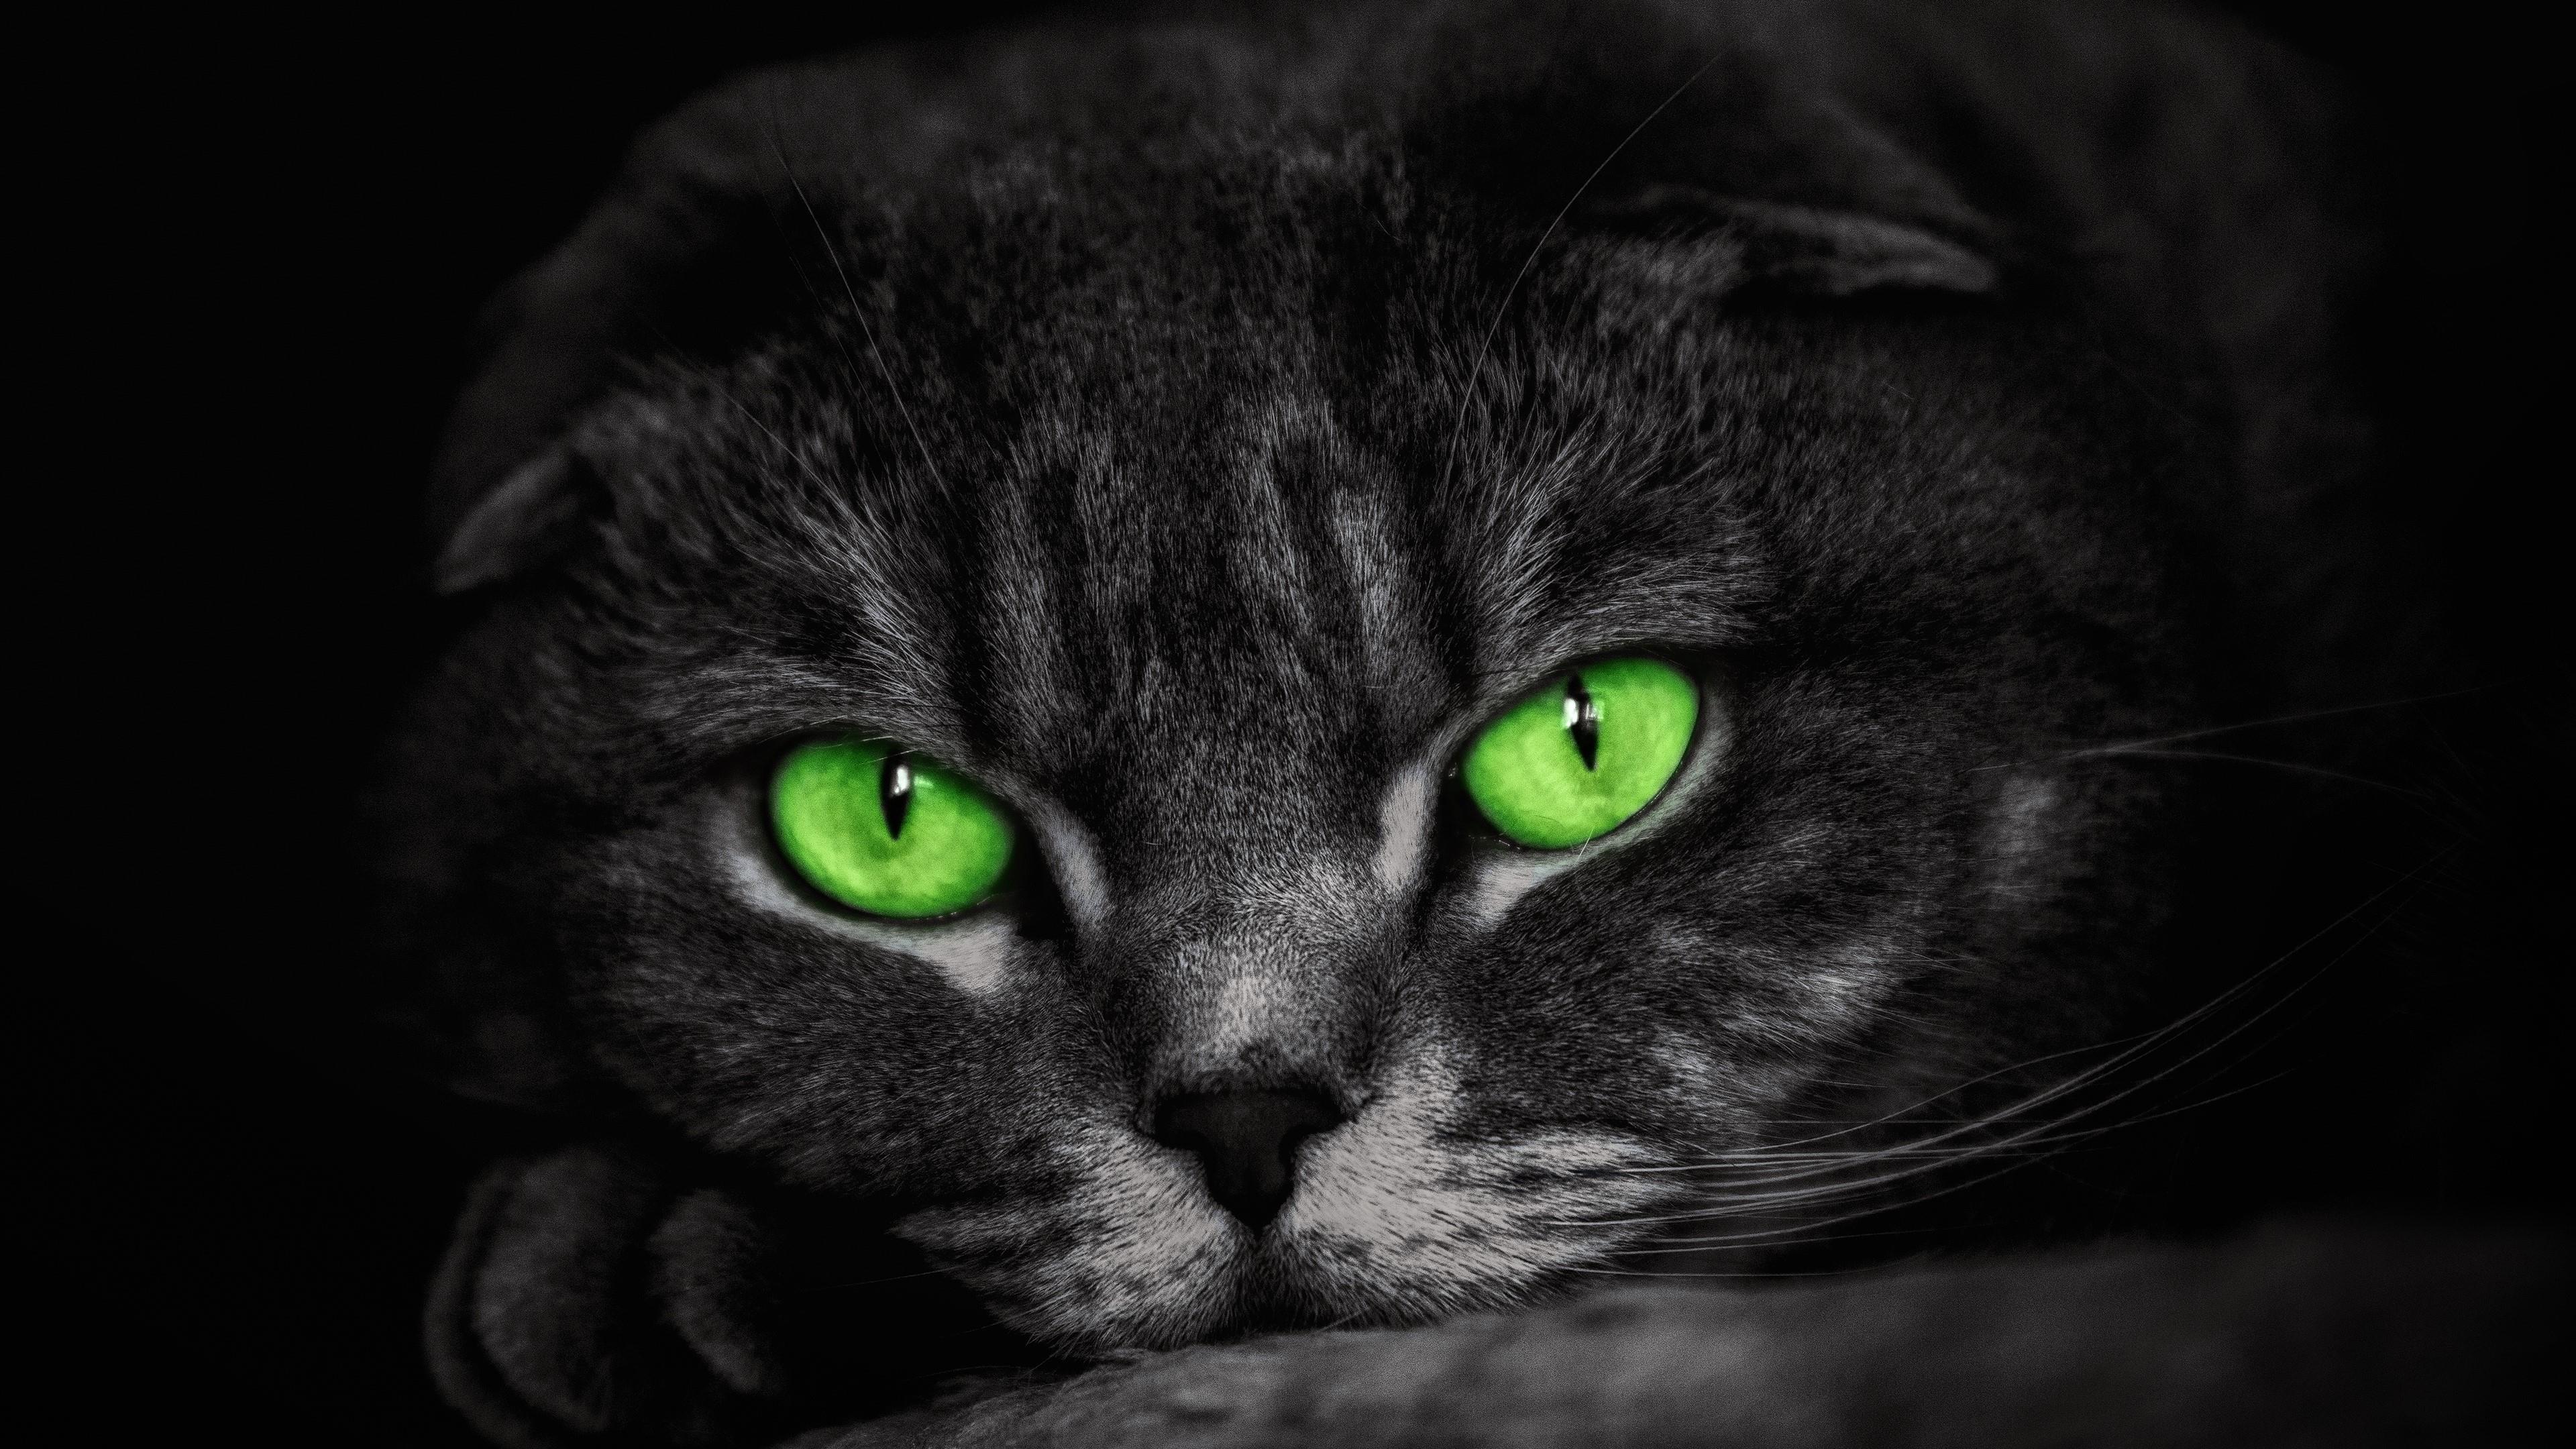  Cat  with green eyes wallpaper  backiee